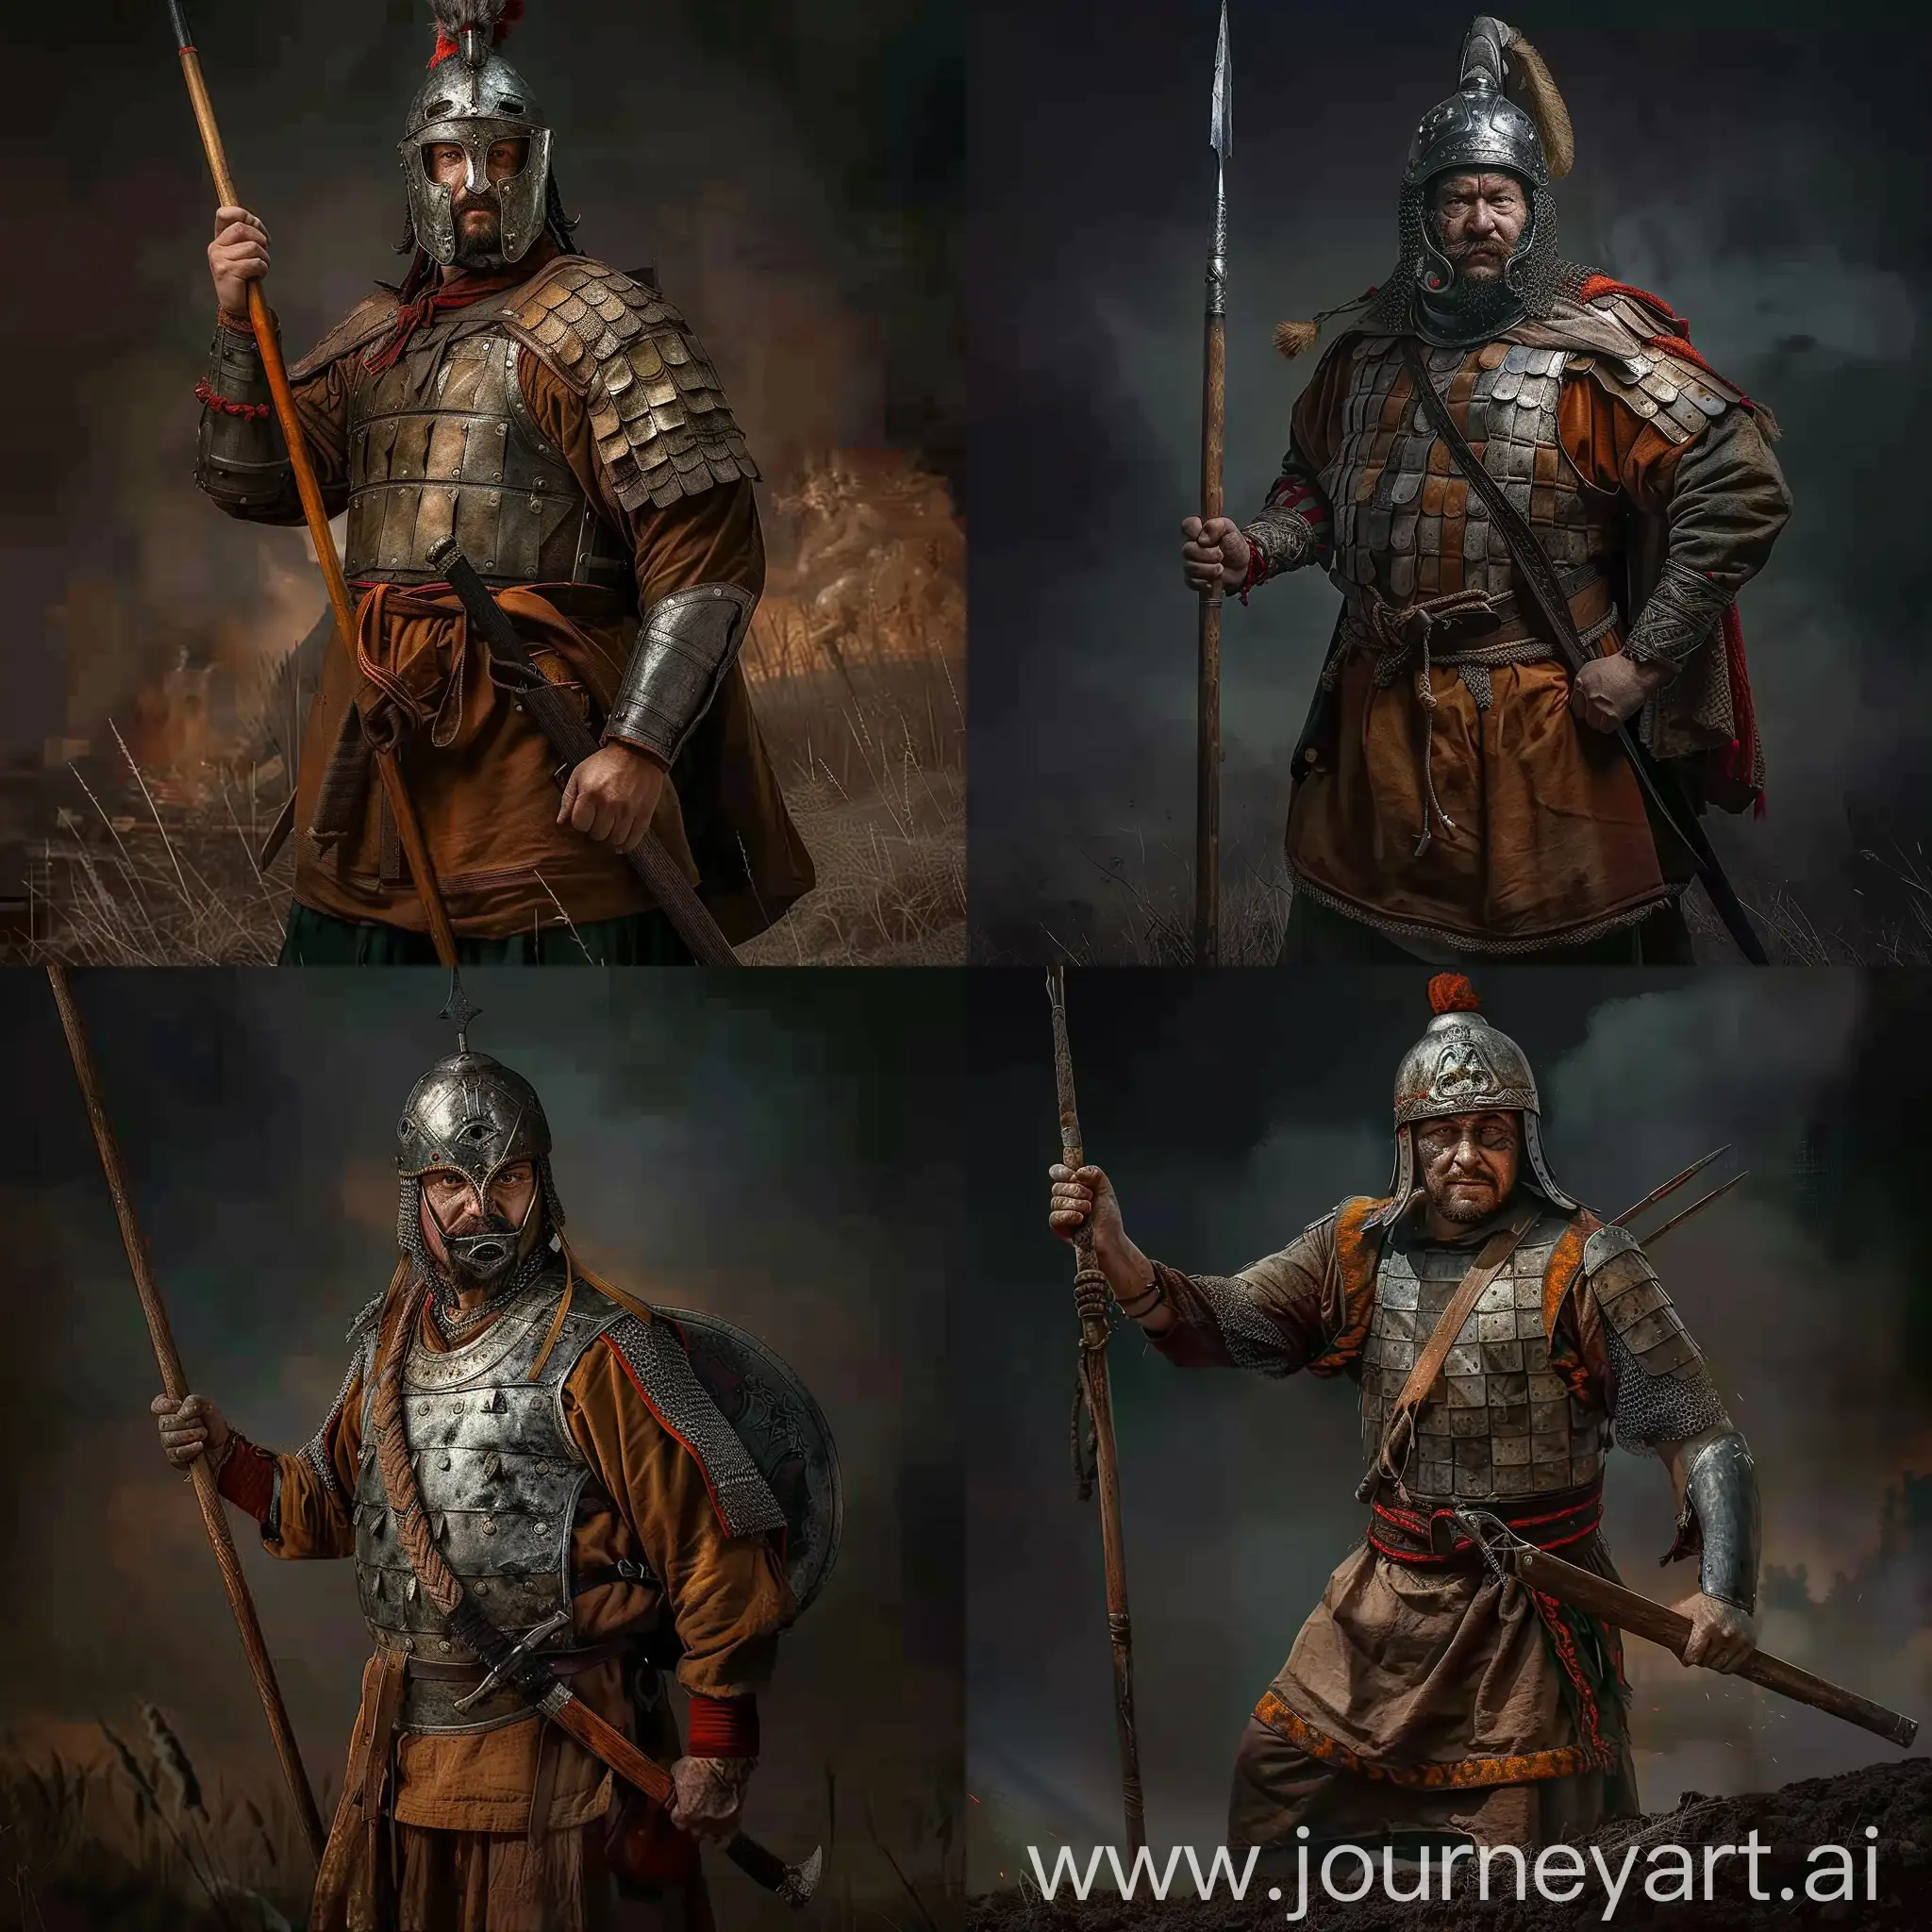 Kipchak Warrior with lamellar armor over brown tunic, wearing war helmet with facial features, has a pike on his hand, posing, cinematic lighting